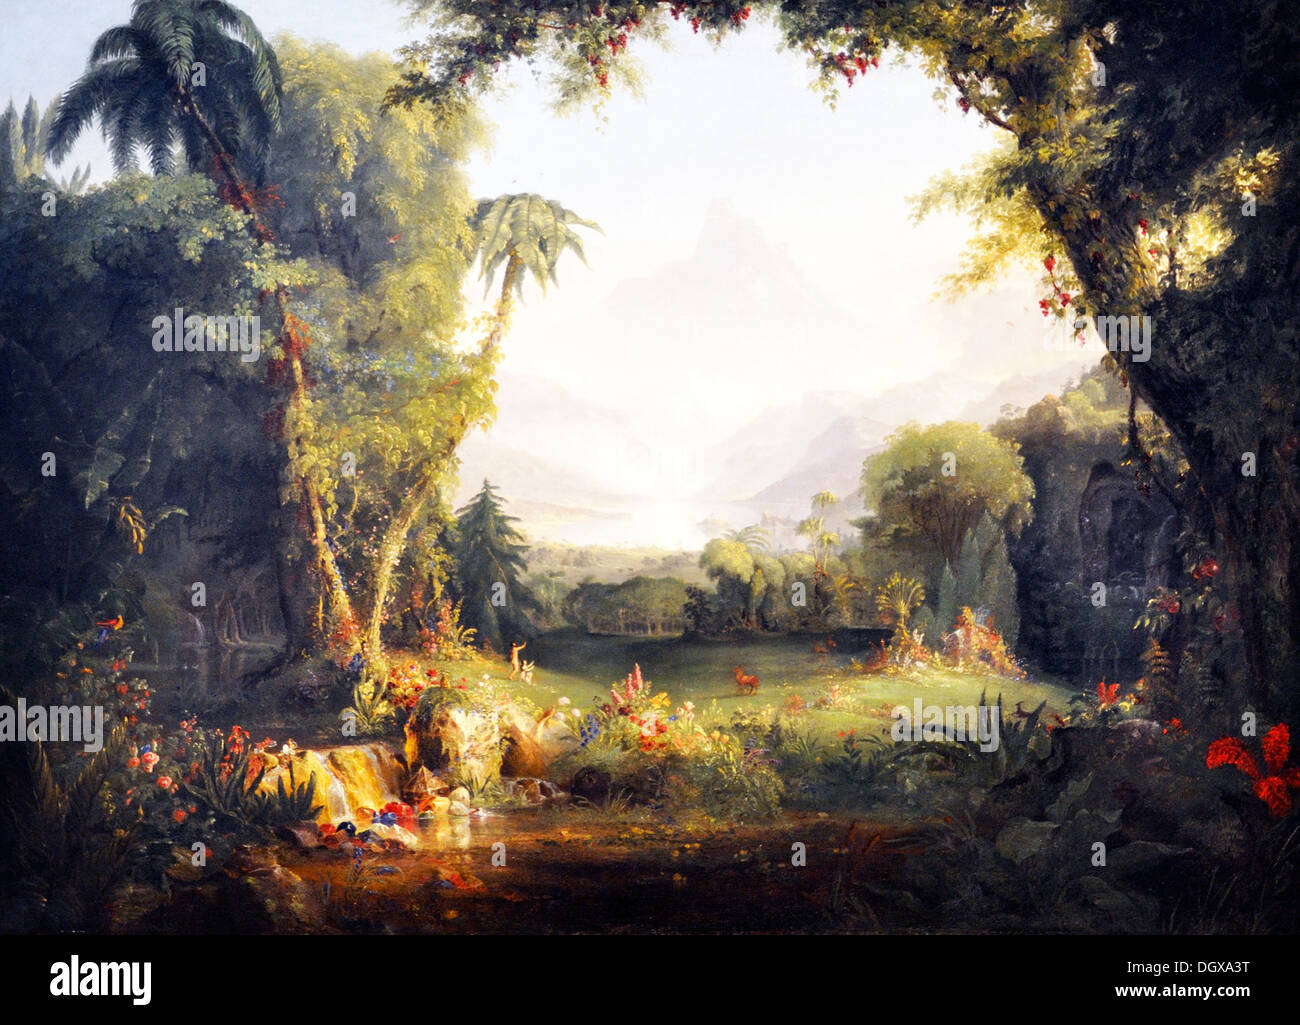 Garden Of Eden Painting High Resolution Stock Photography And Images Alamy